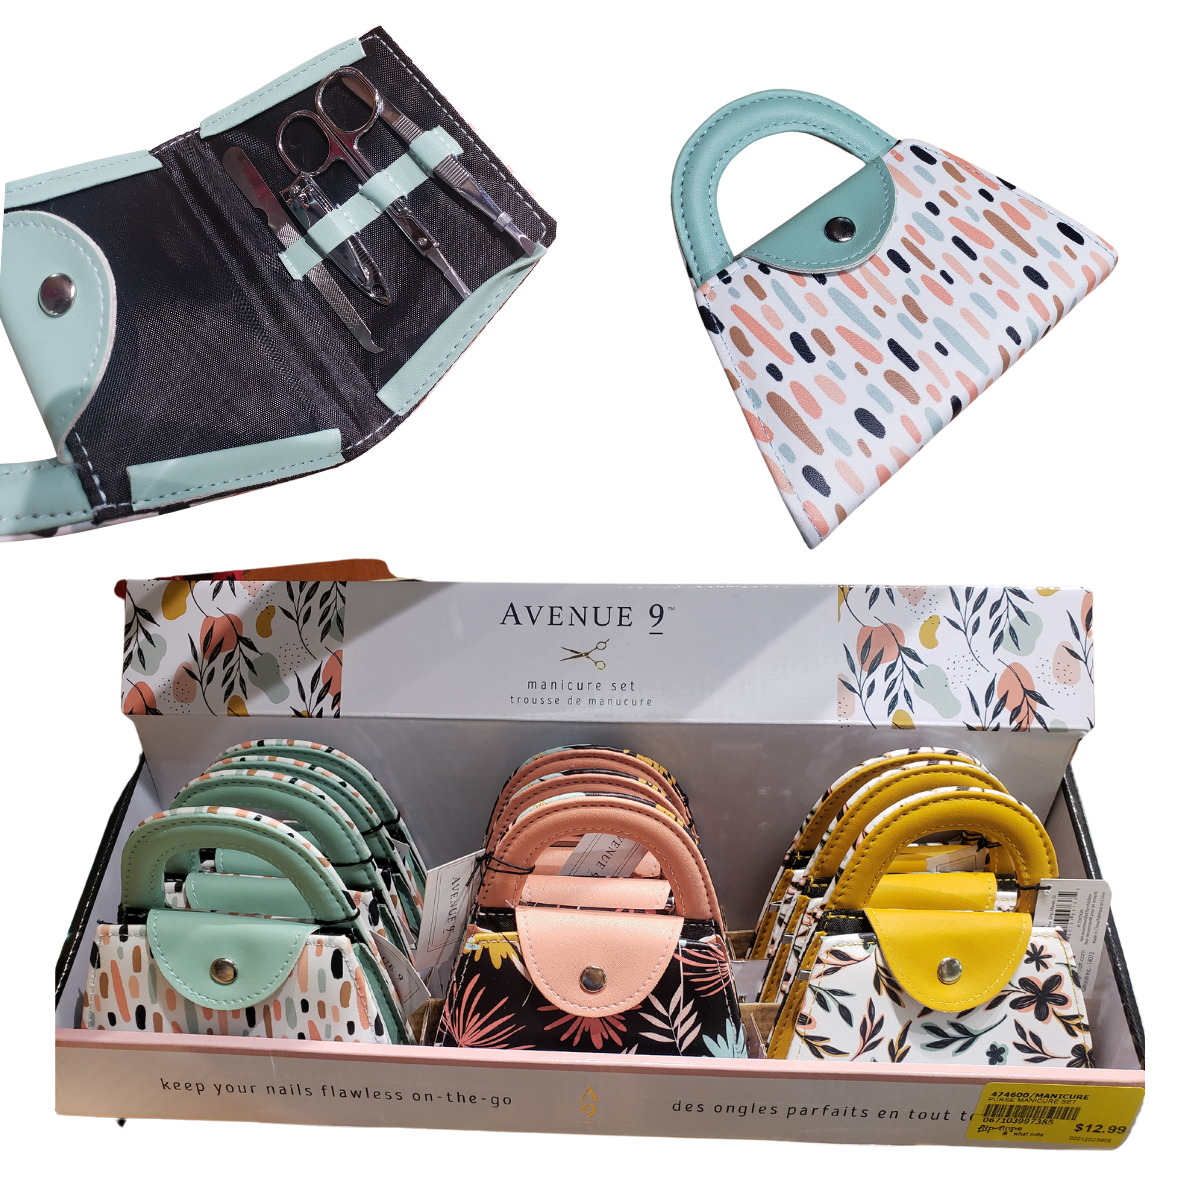 GIFTCRAFT's handbag set with color choice in a display box.